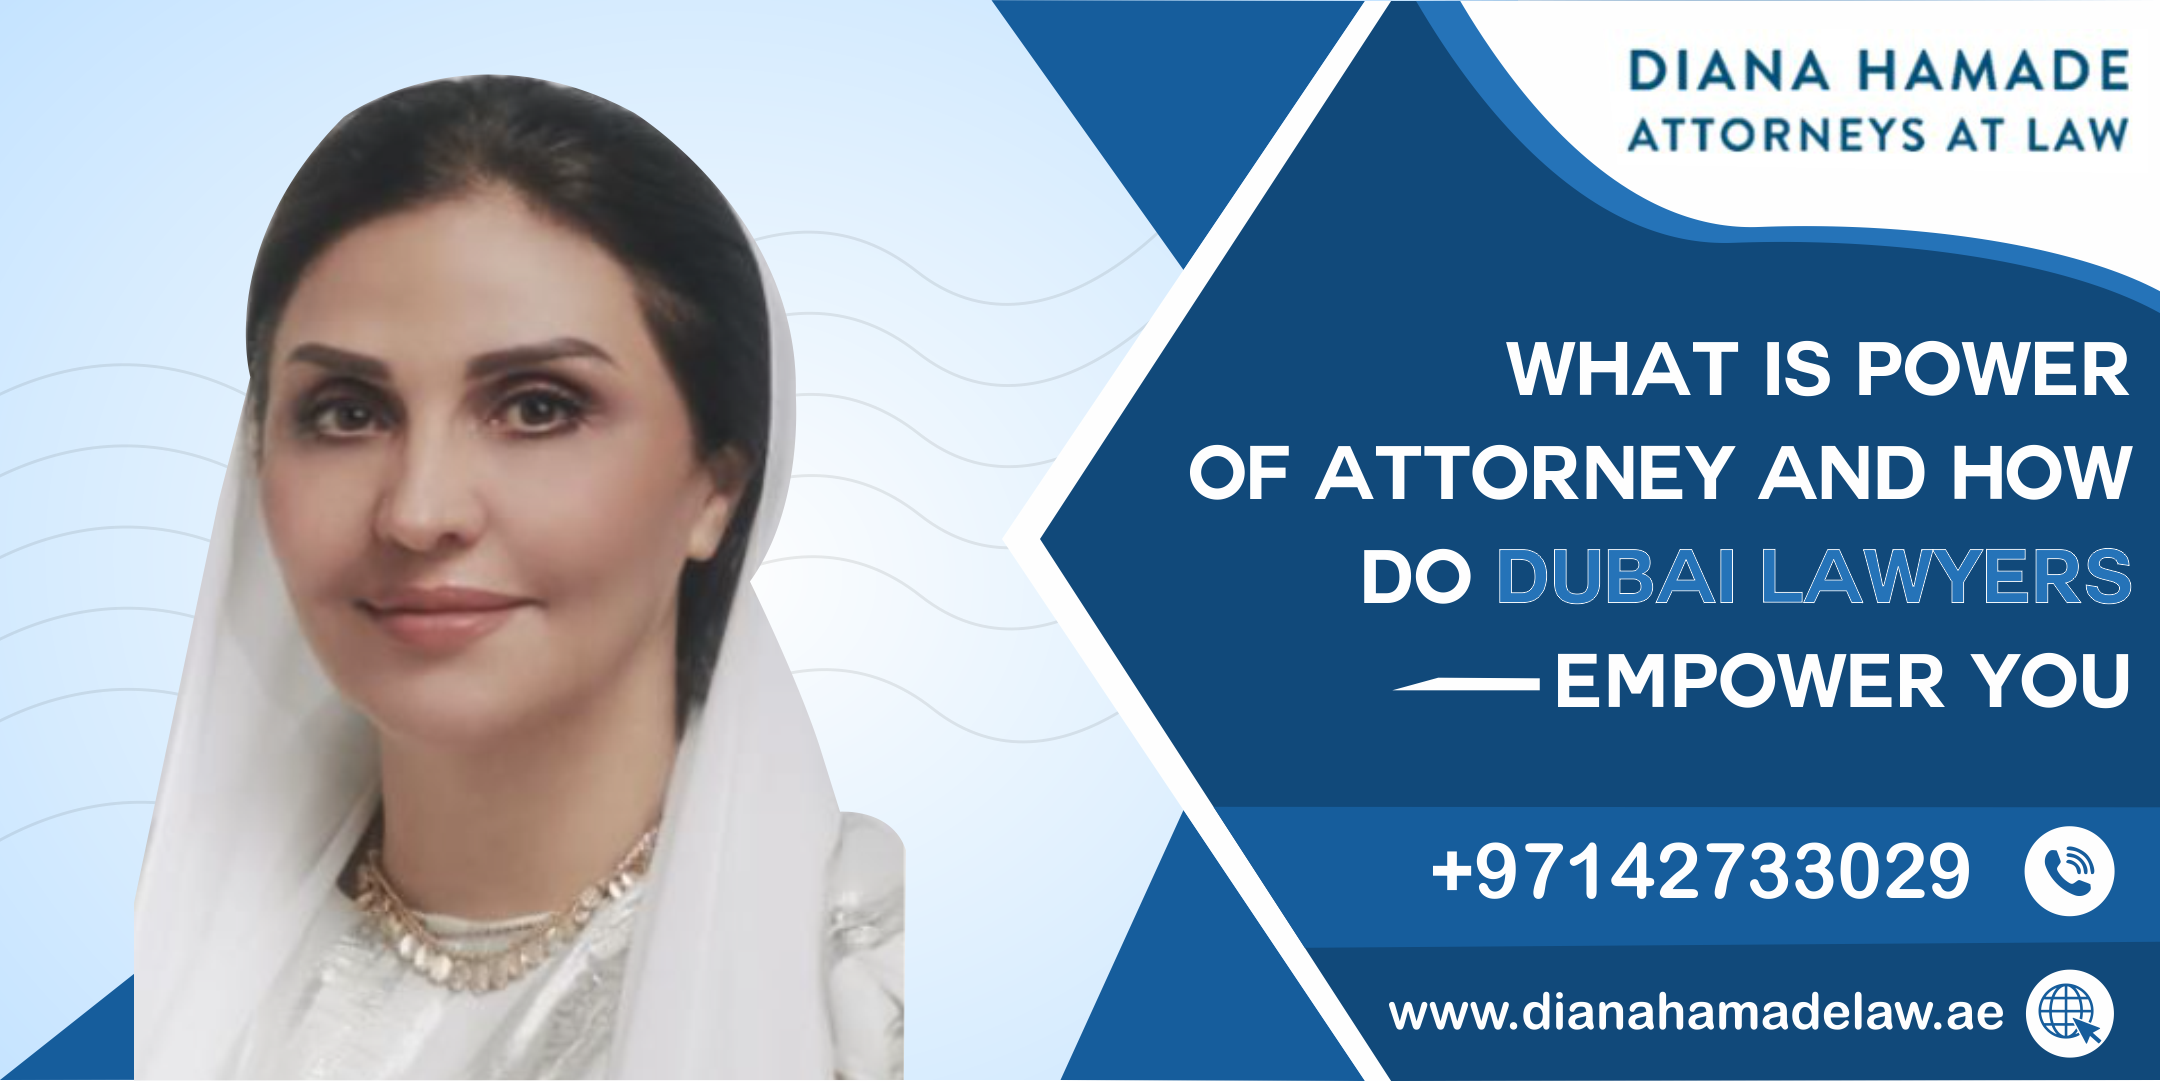 What is Power of Attorney, and How do Dubai Lawyers Empower You?